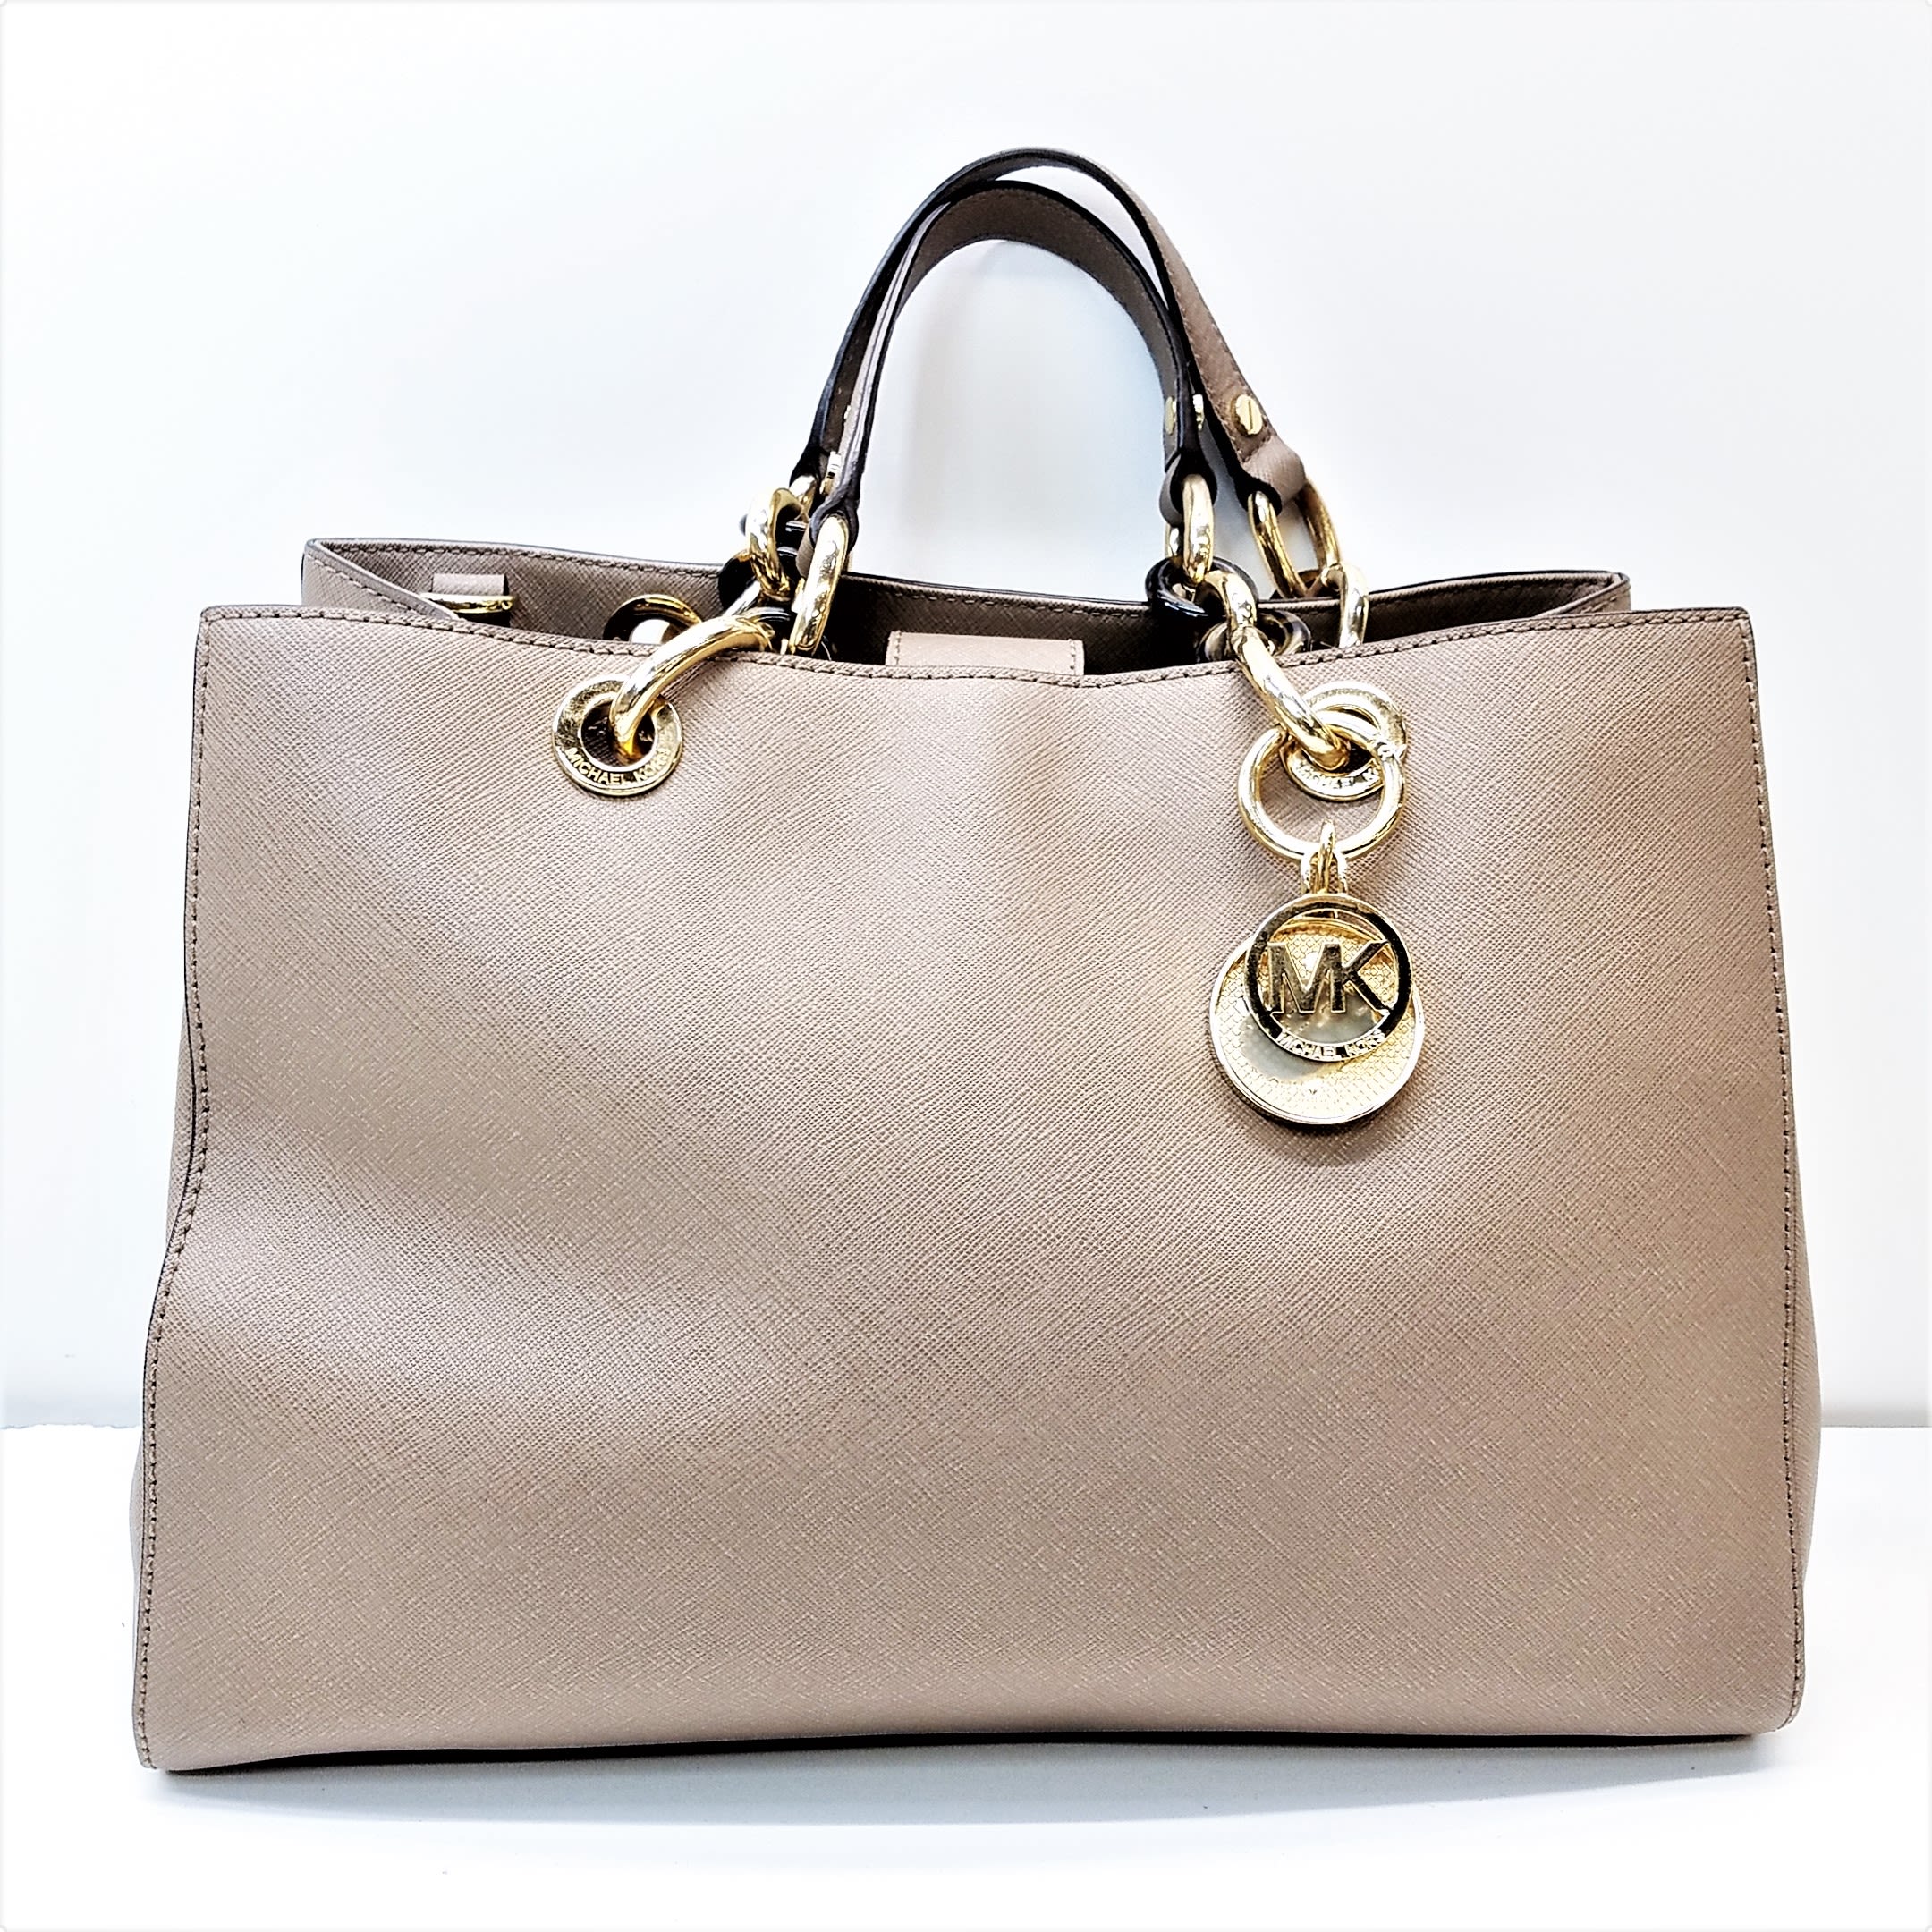 Buy the Michael Kors Saffiano Leather Cynthia Satchel Taupe | GoodwillFinds